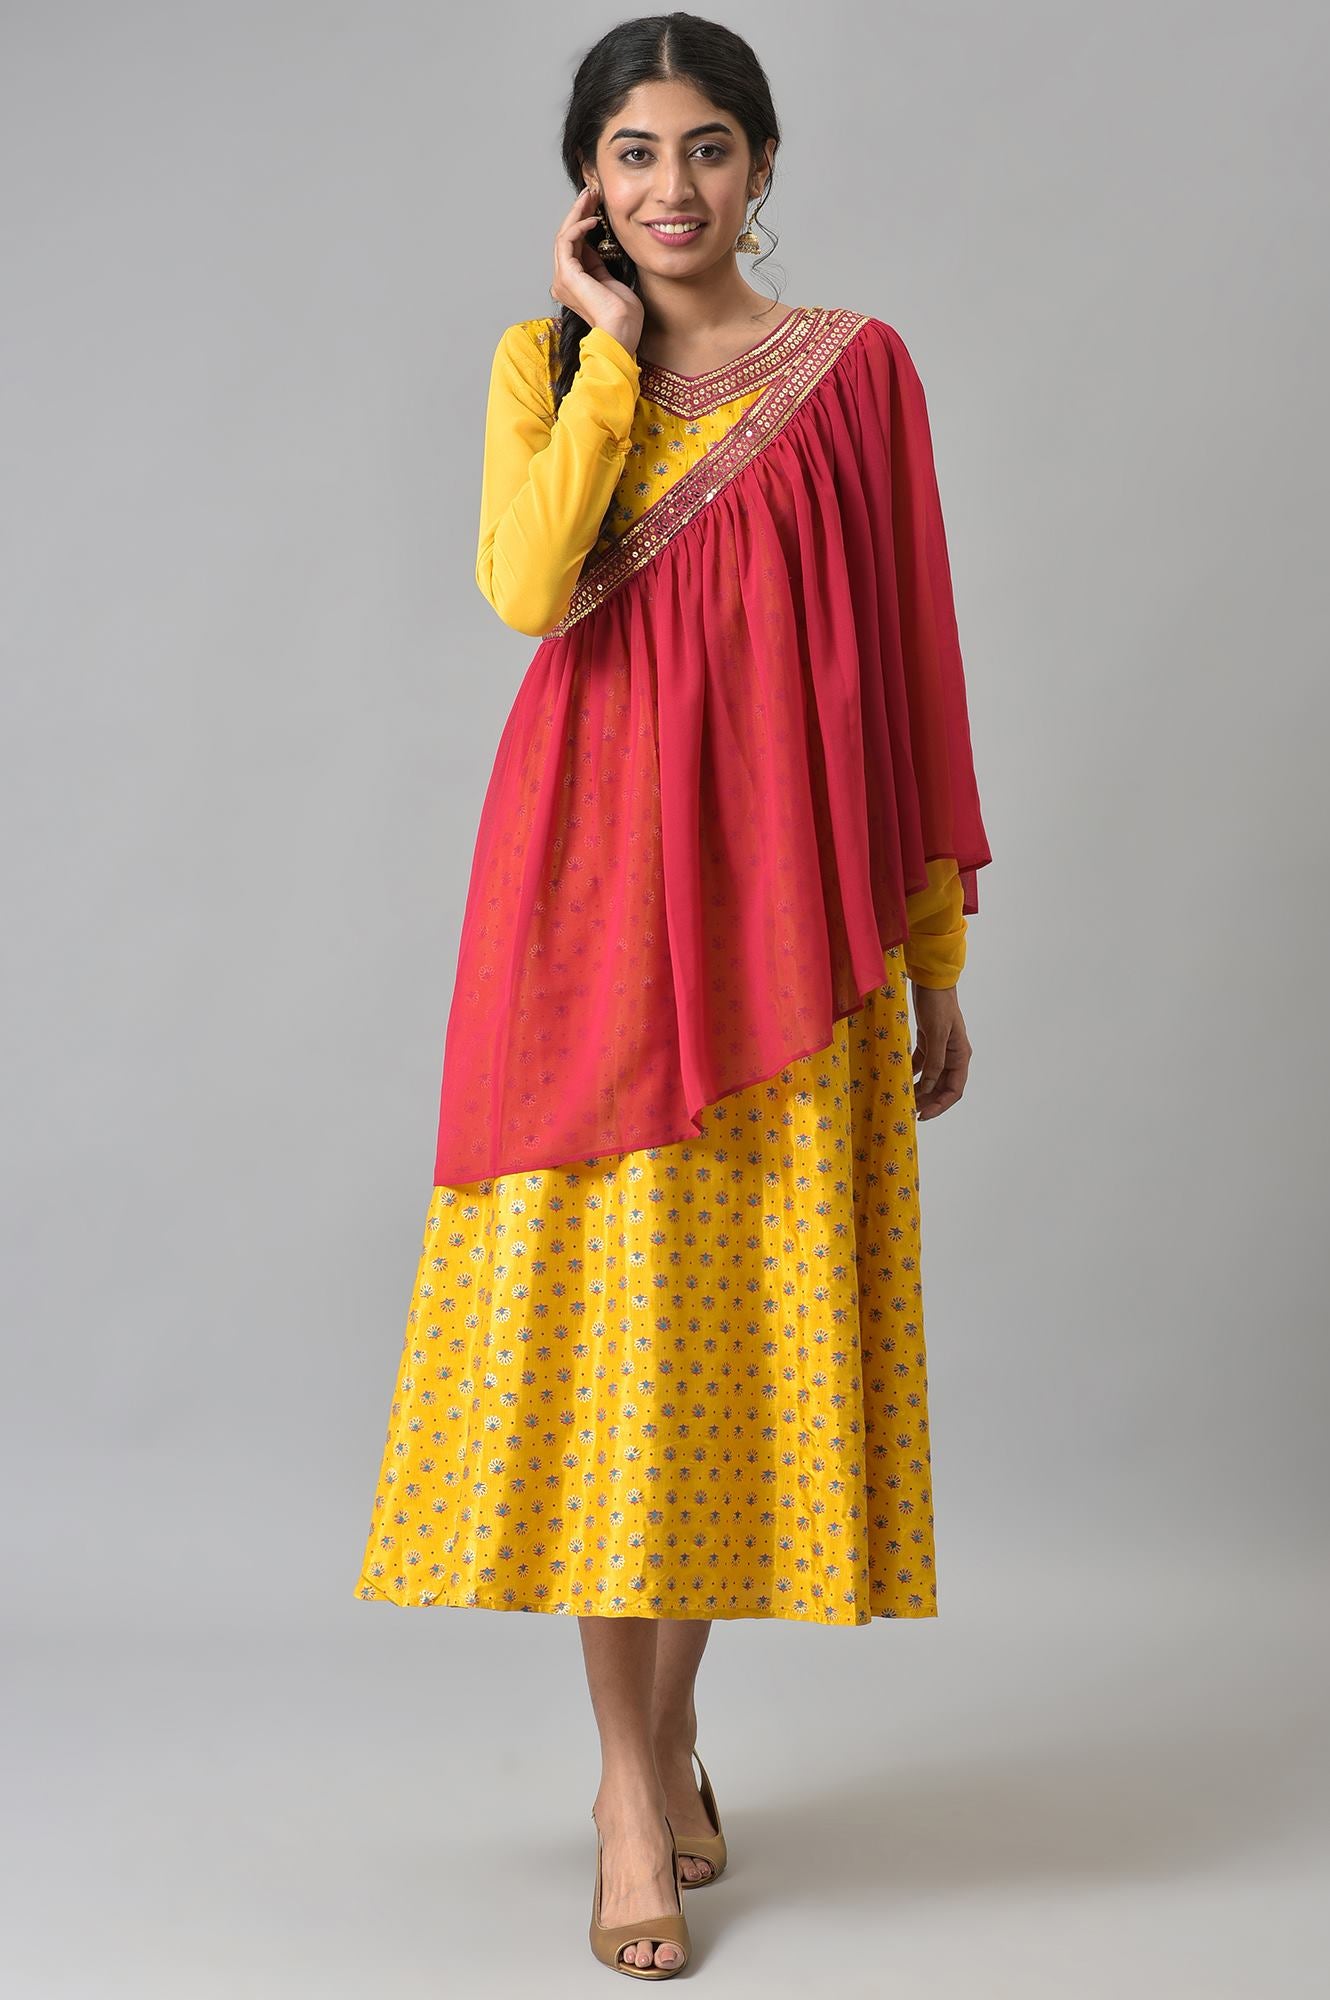 Yellow Zari Embroidered Dress with Pink Embroidered Dupatta